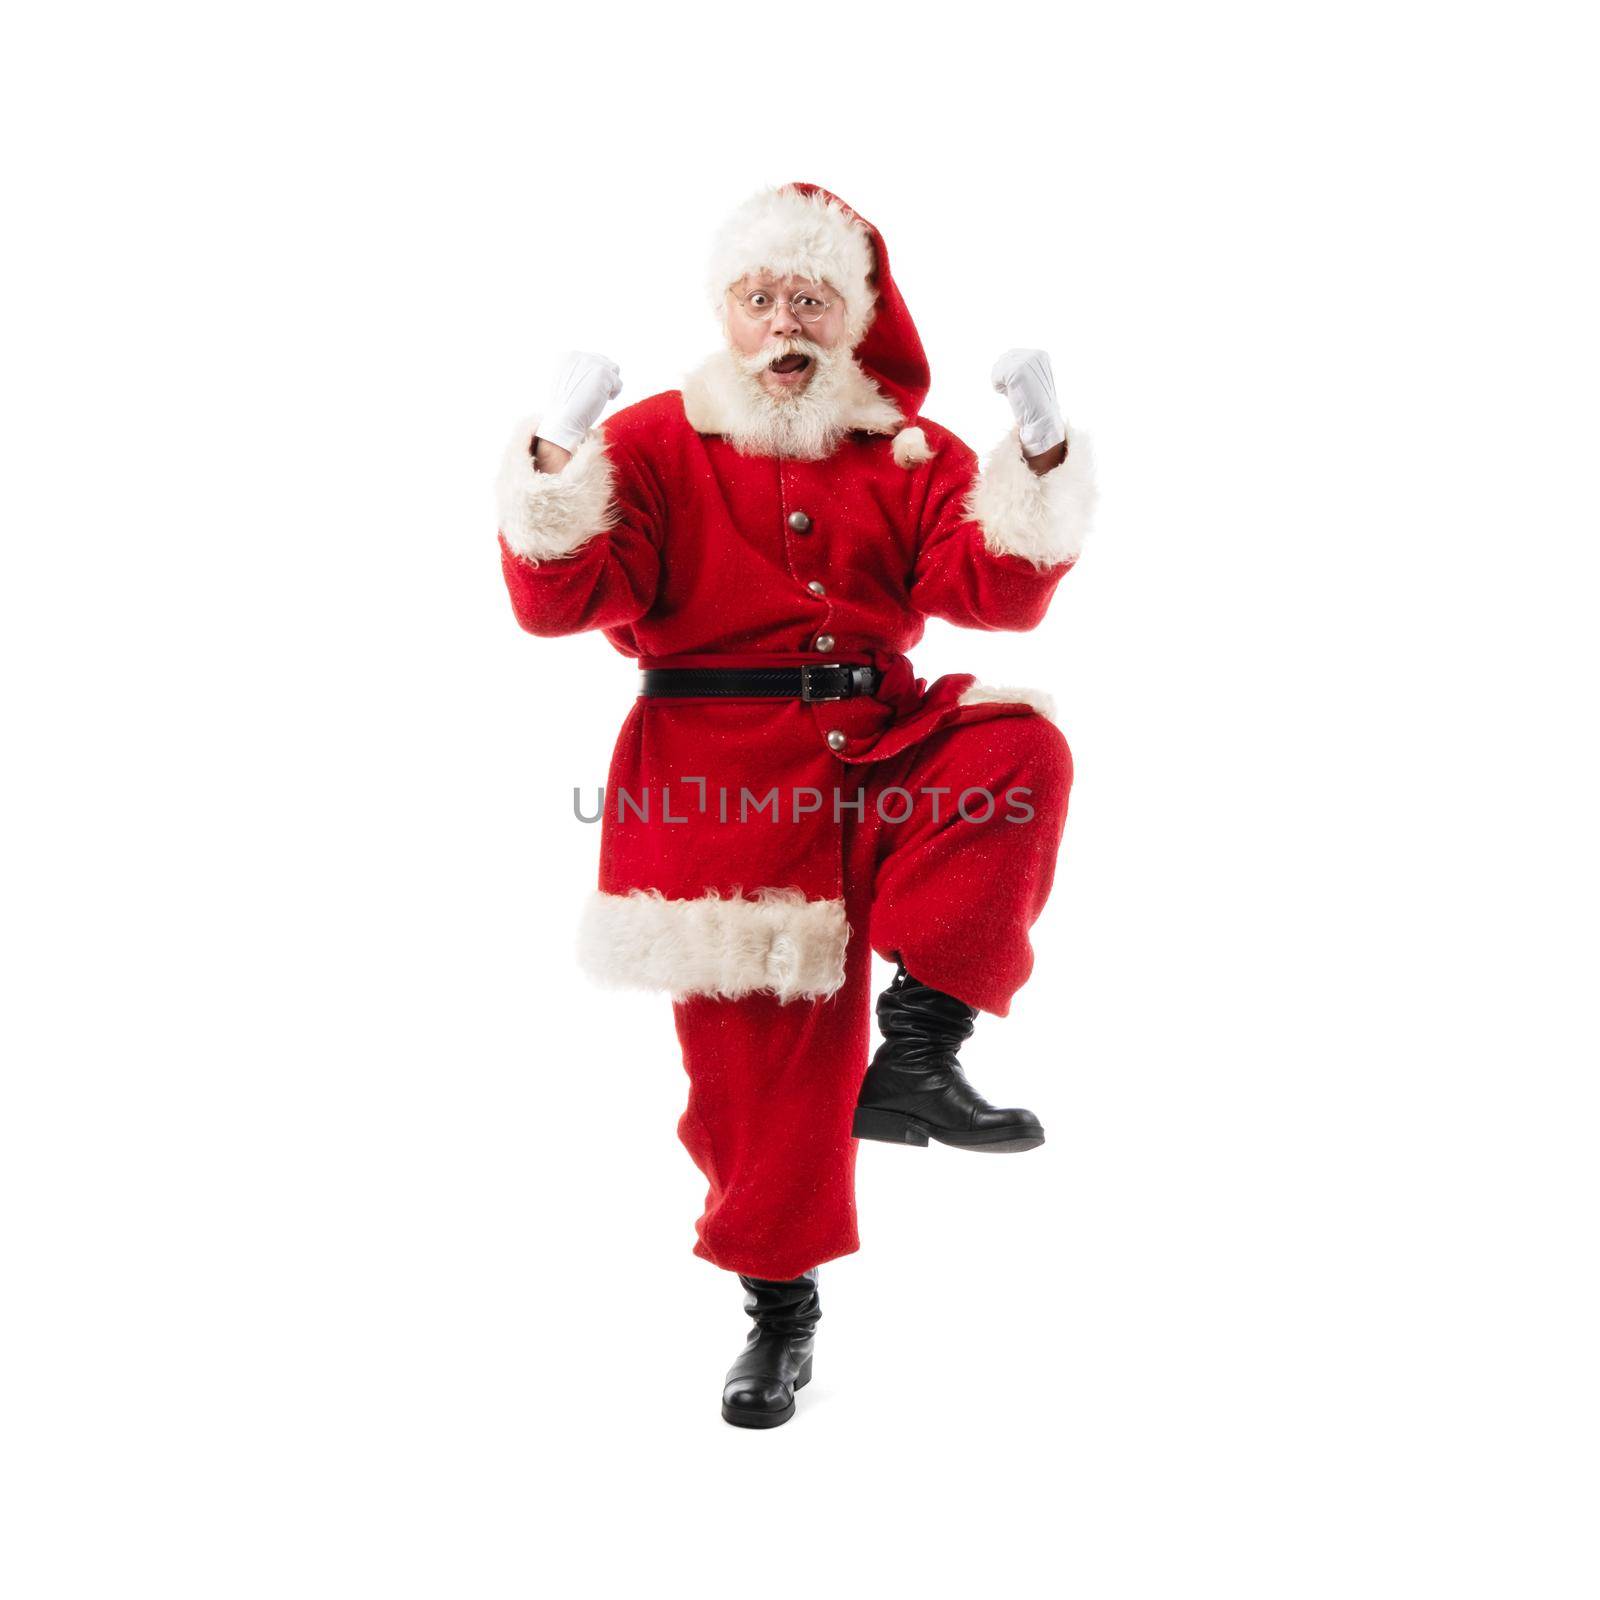 Santa claus celebrating hold fists by ALotOfPeople